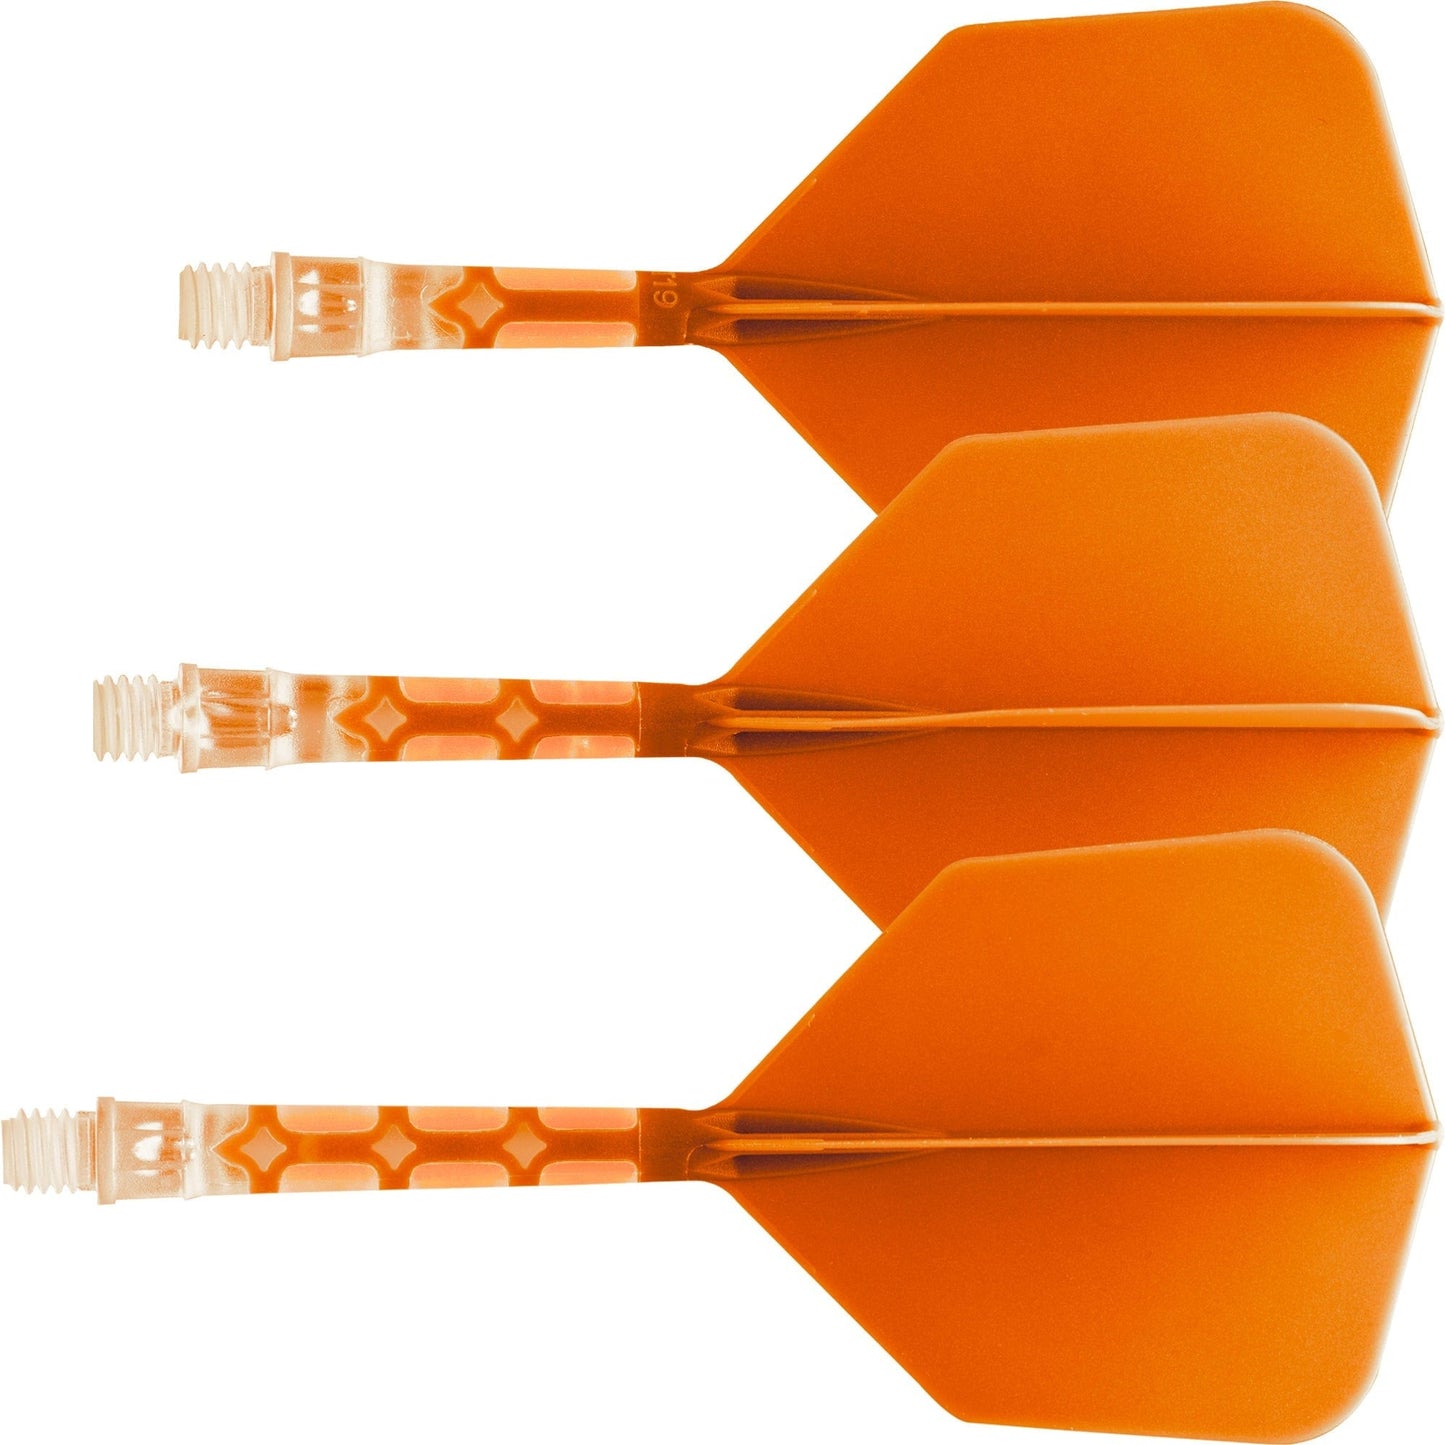 Cuesoul Rost T19 Integrated Dart Shaft and Flights - Big Wing - Clear with Orange Flight